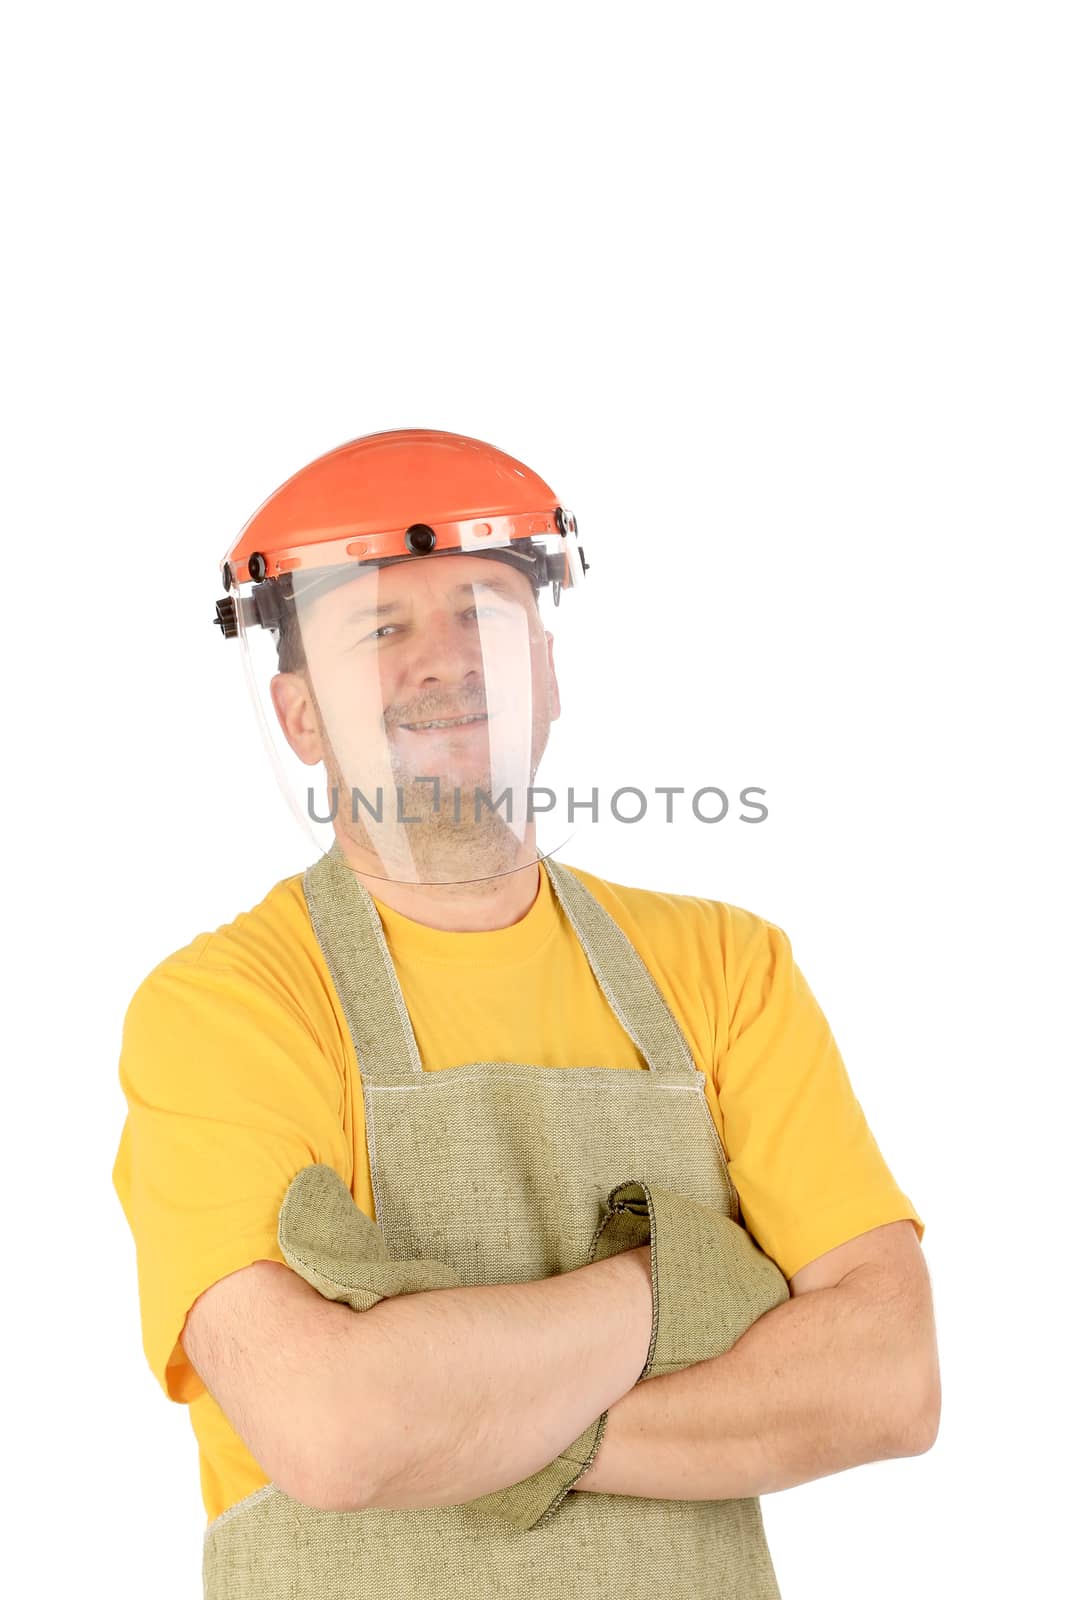 Apron man smiling with arm crossed. Isolated on a white background.